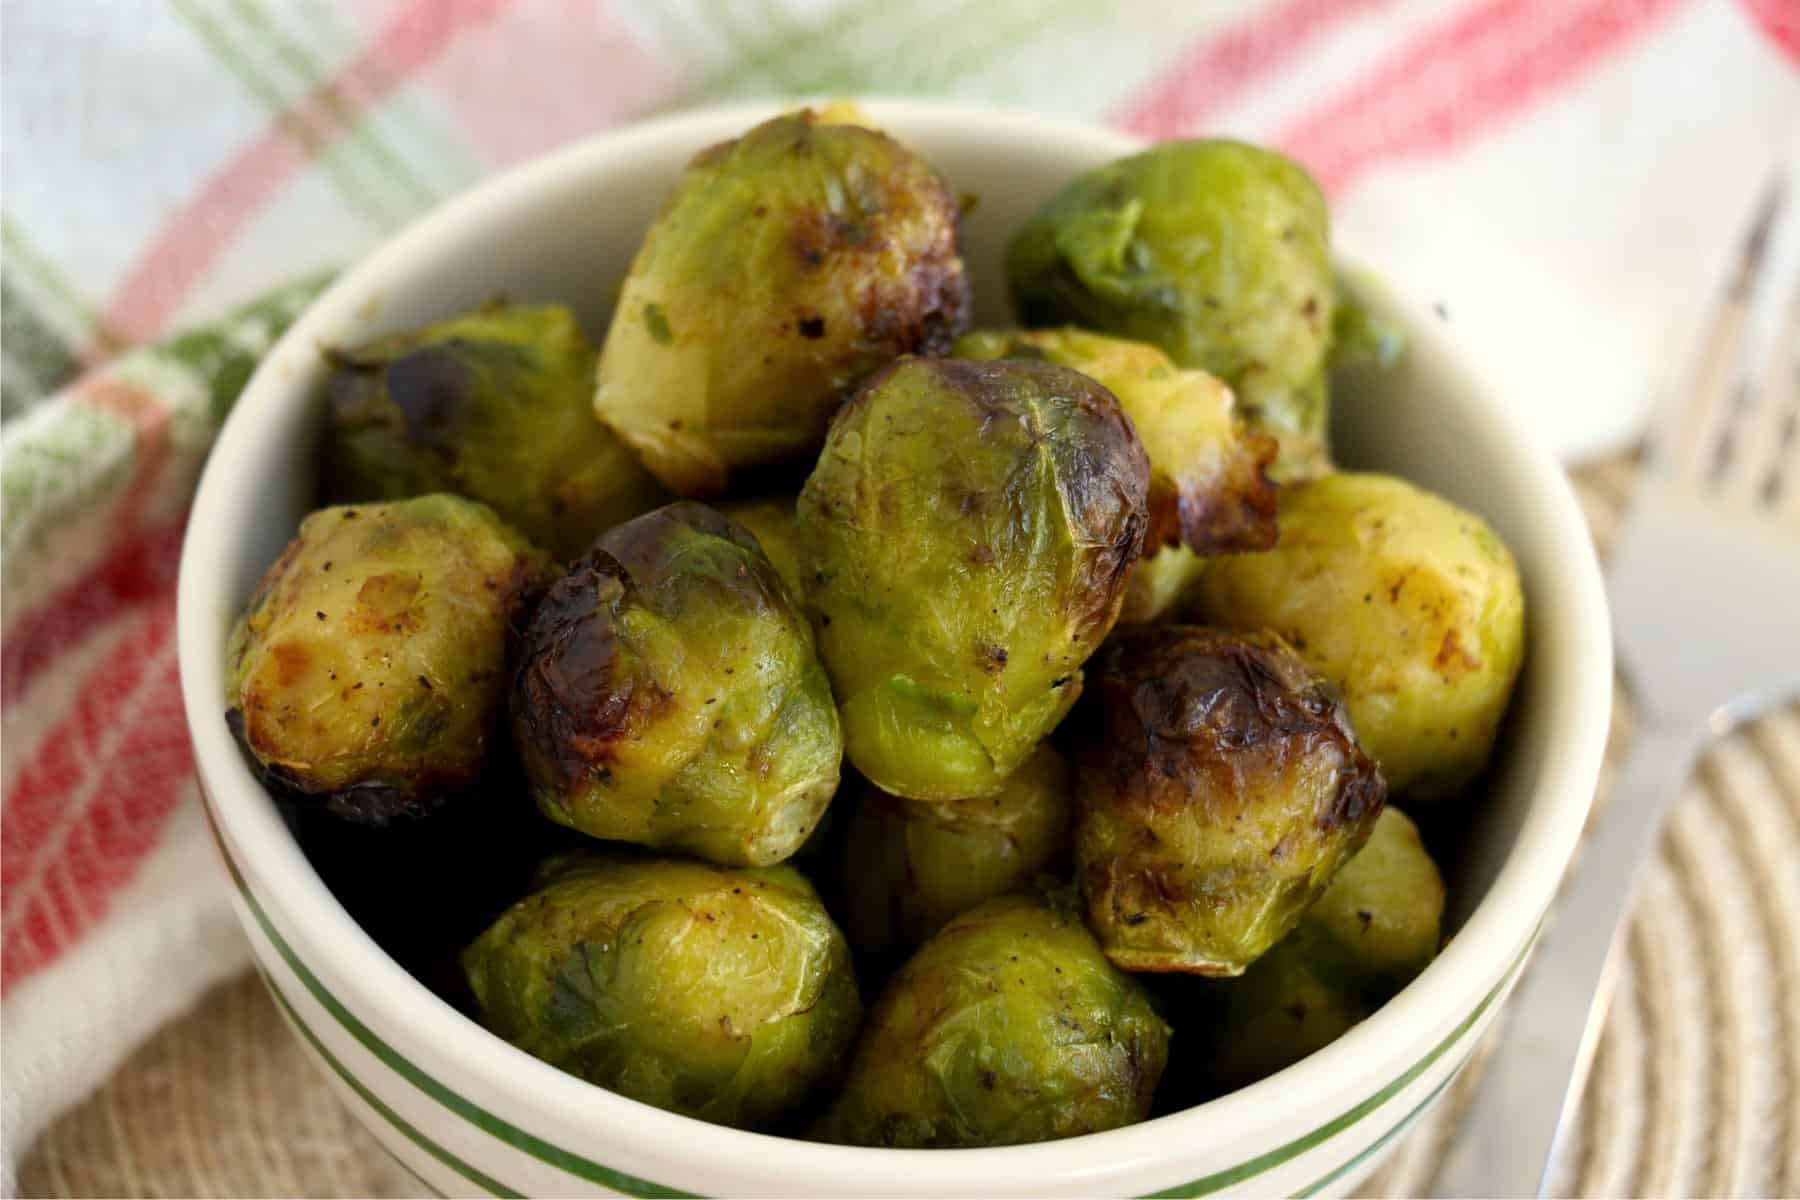 Closeup shot of cooked brussel sprouts in bowl